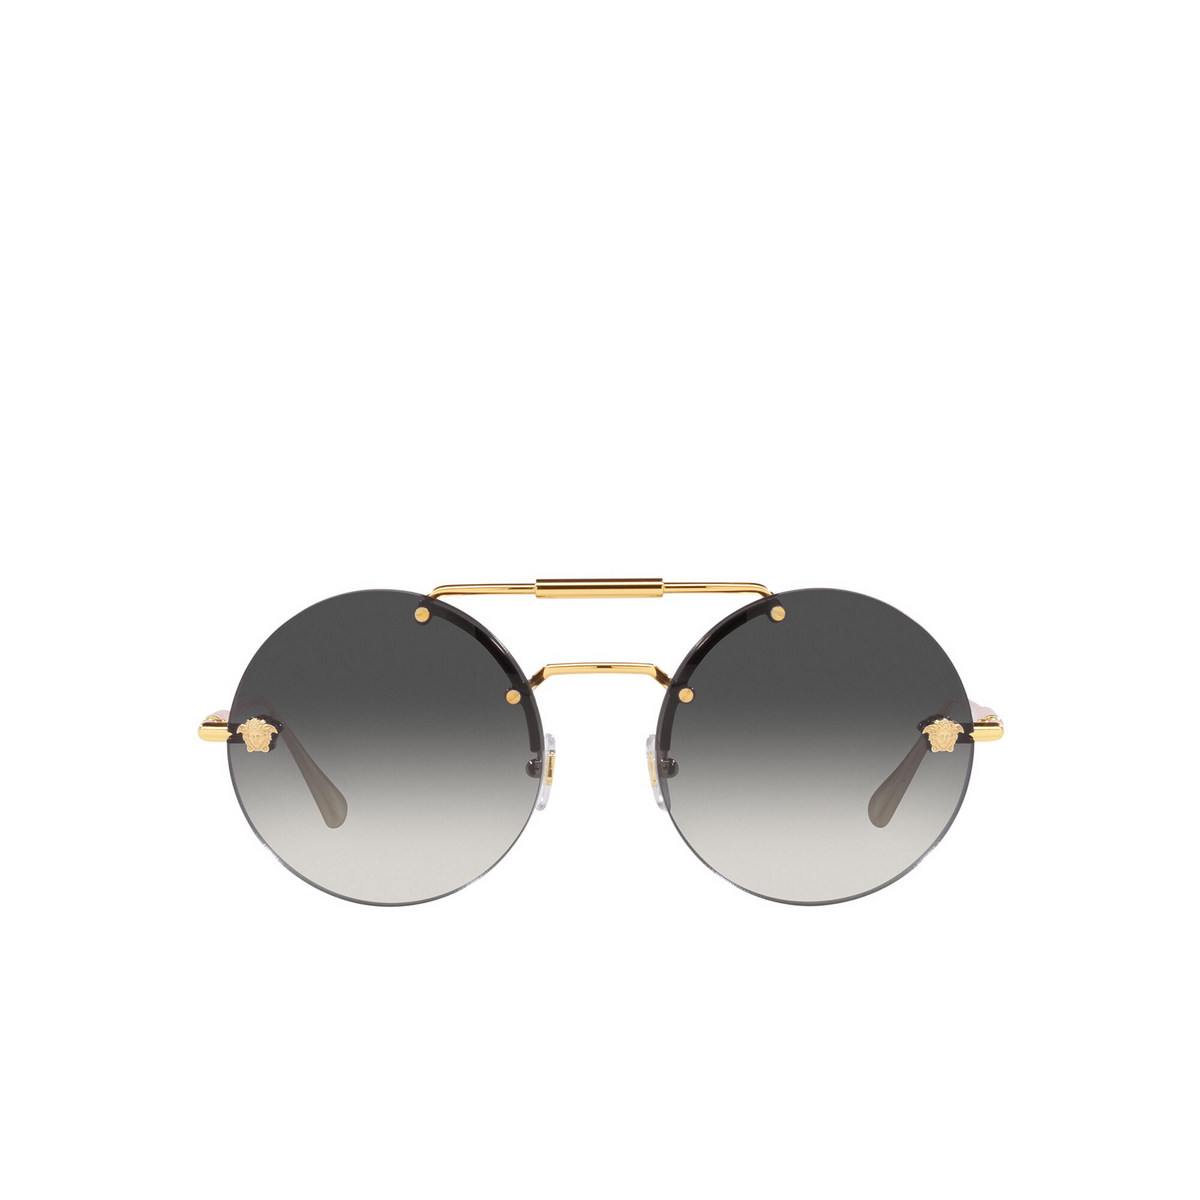 Versace® Round Sunglasses: VE2244 color Gold 10028G - front view.